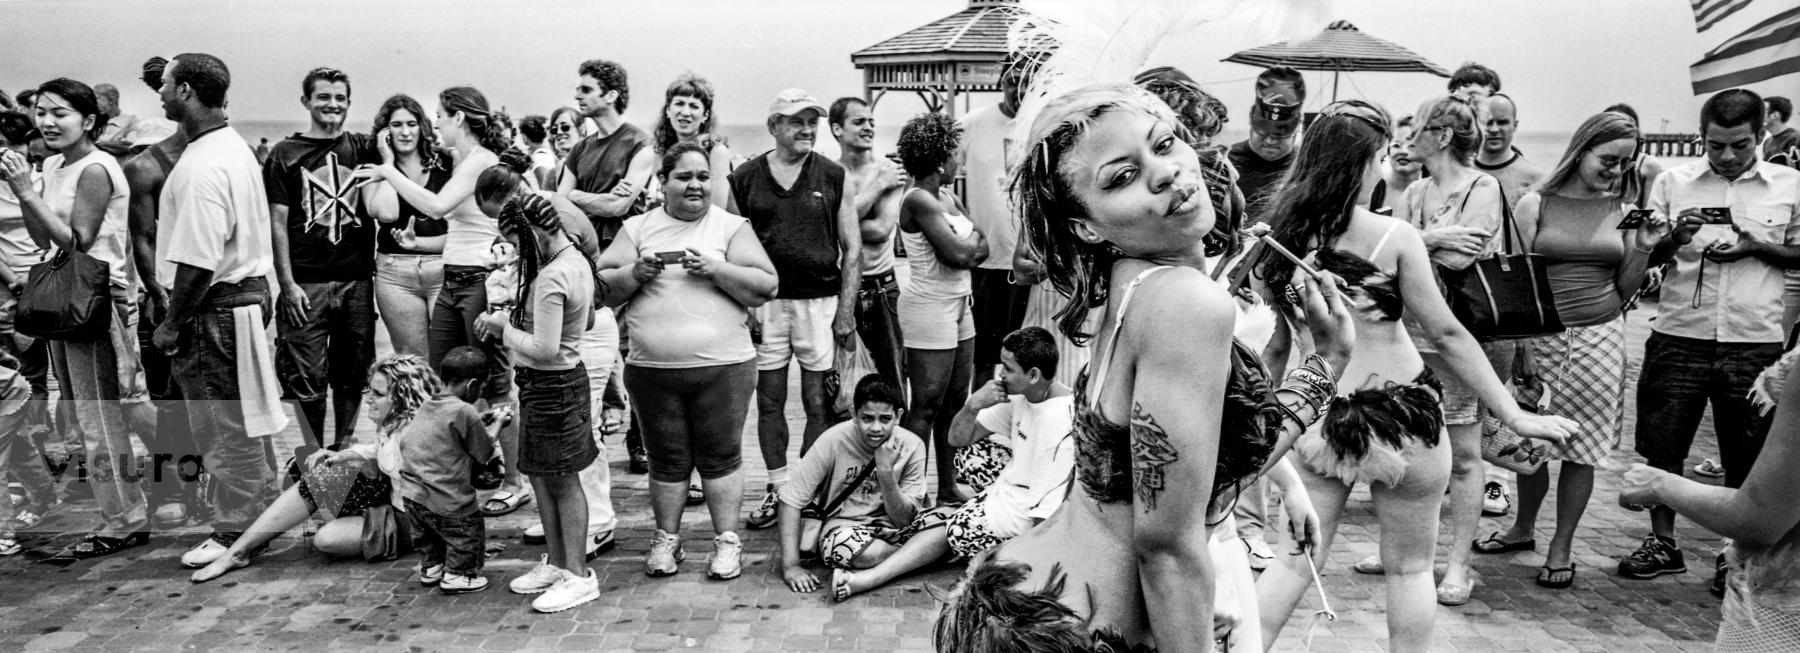 Purchase The Mermaid Parade 040626209 by Kenneth Nelson